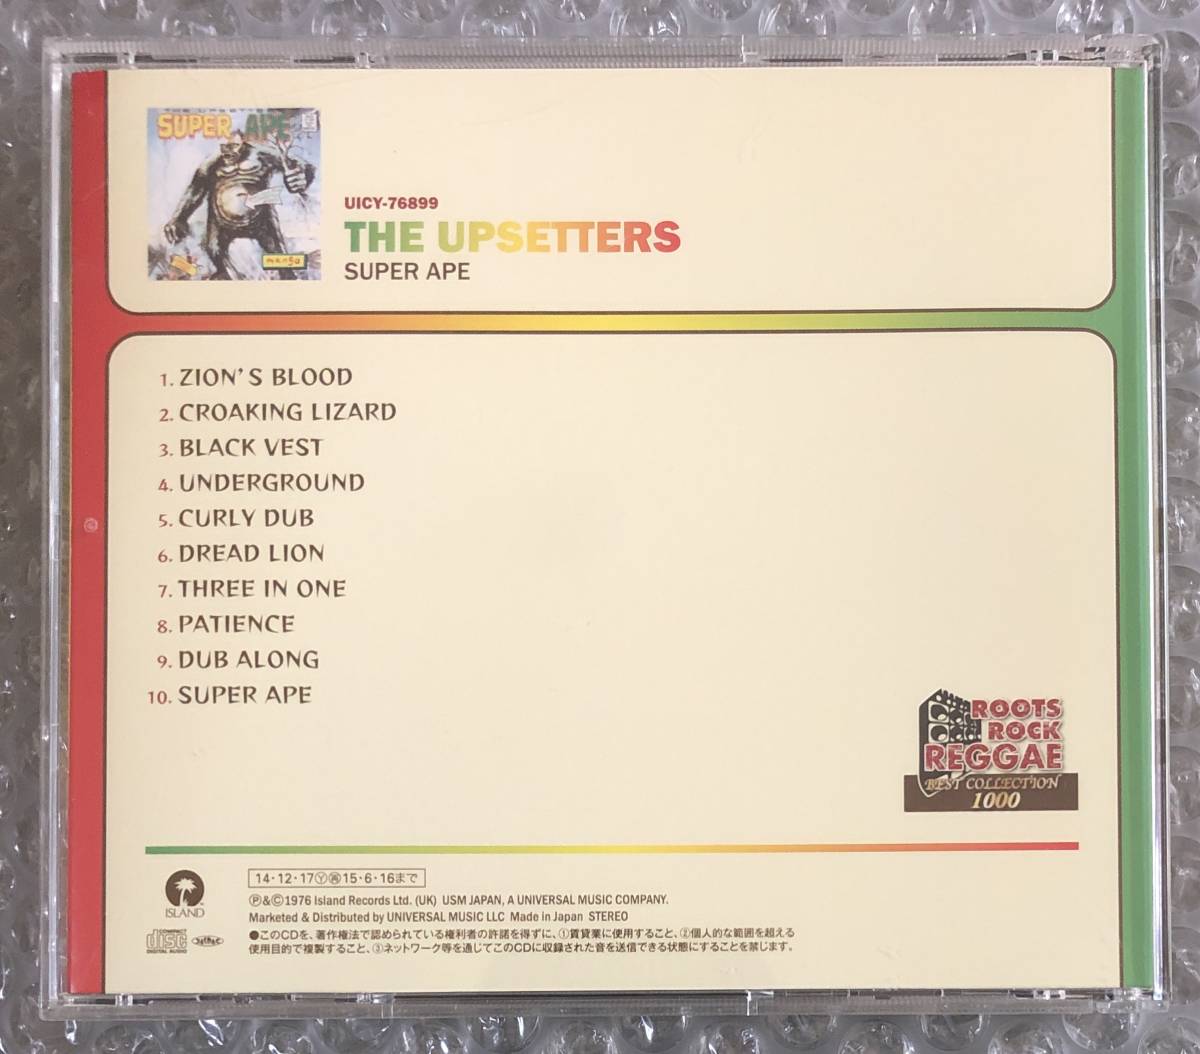 c65 The Upsetters Super Ape Limited Edition 2014 Roots Rock Reggae Best Collection 1000 中古美品_画像2